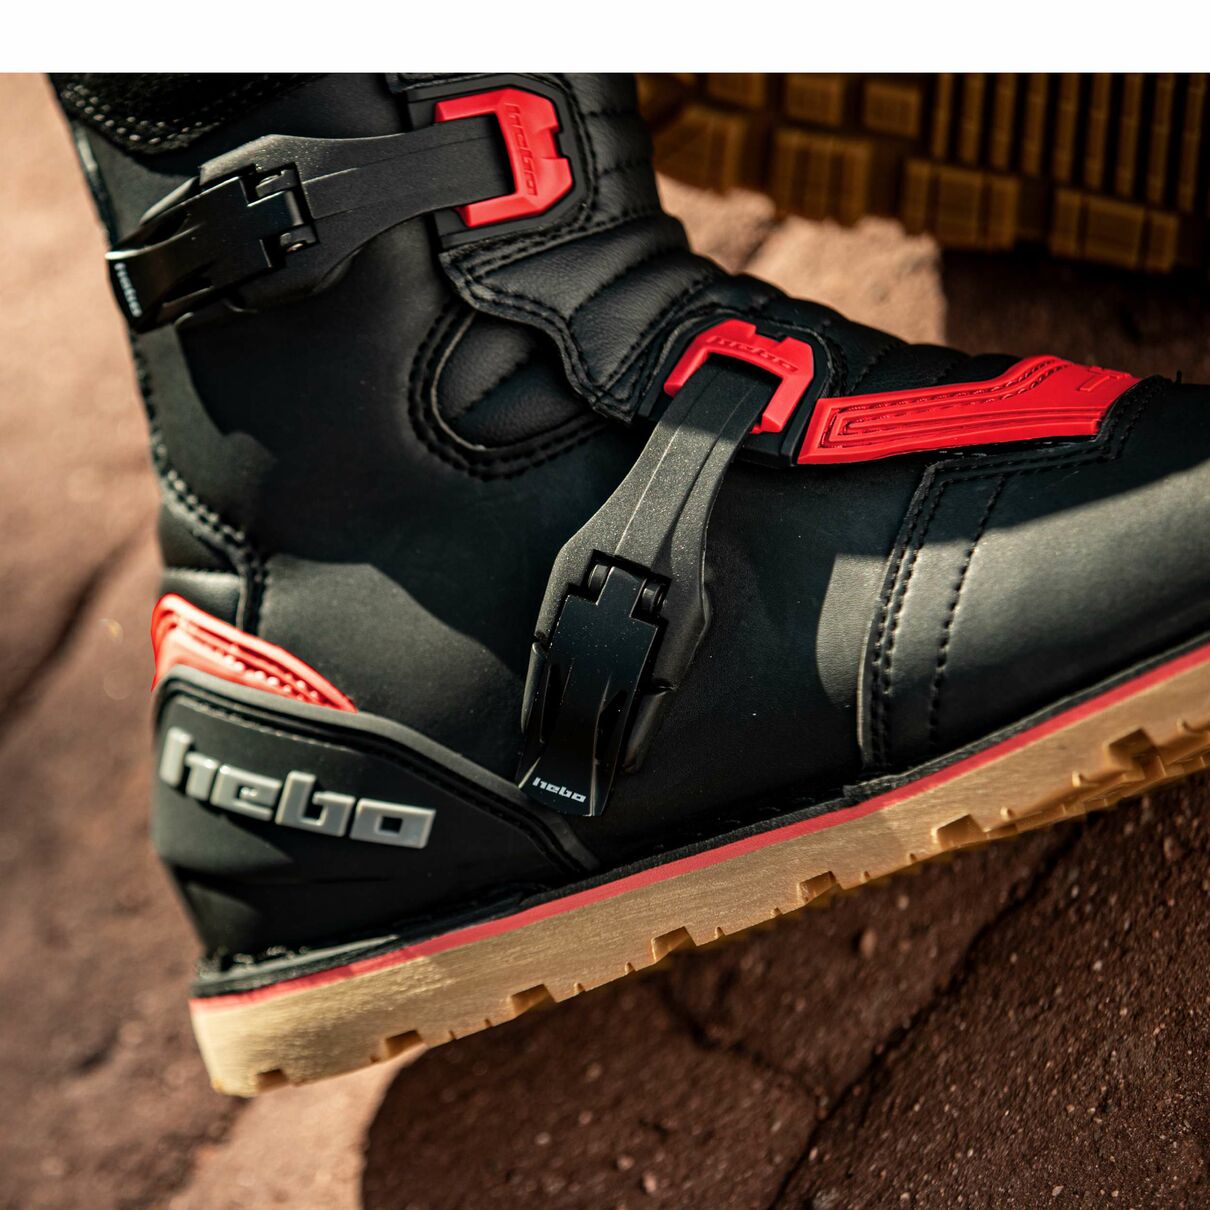 Hebo Trials Boots Technical 3.0 Micro Red